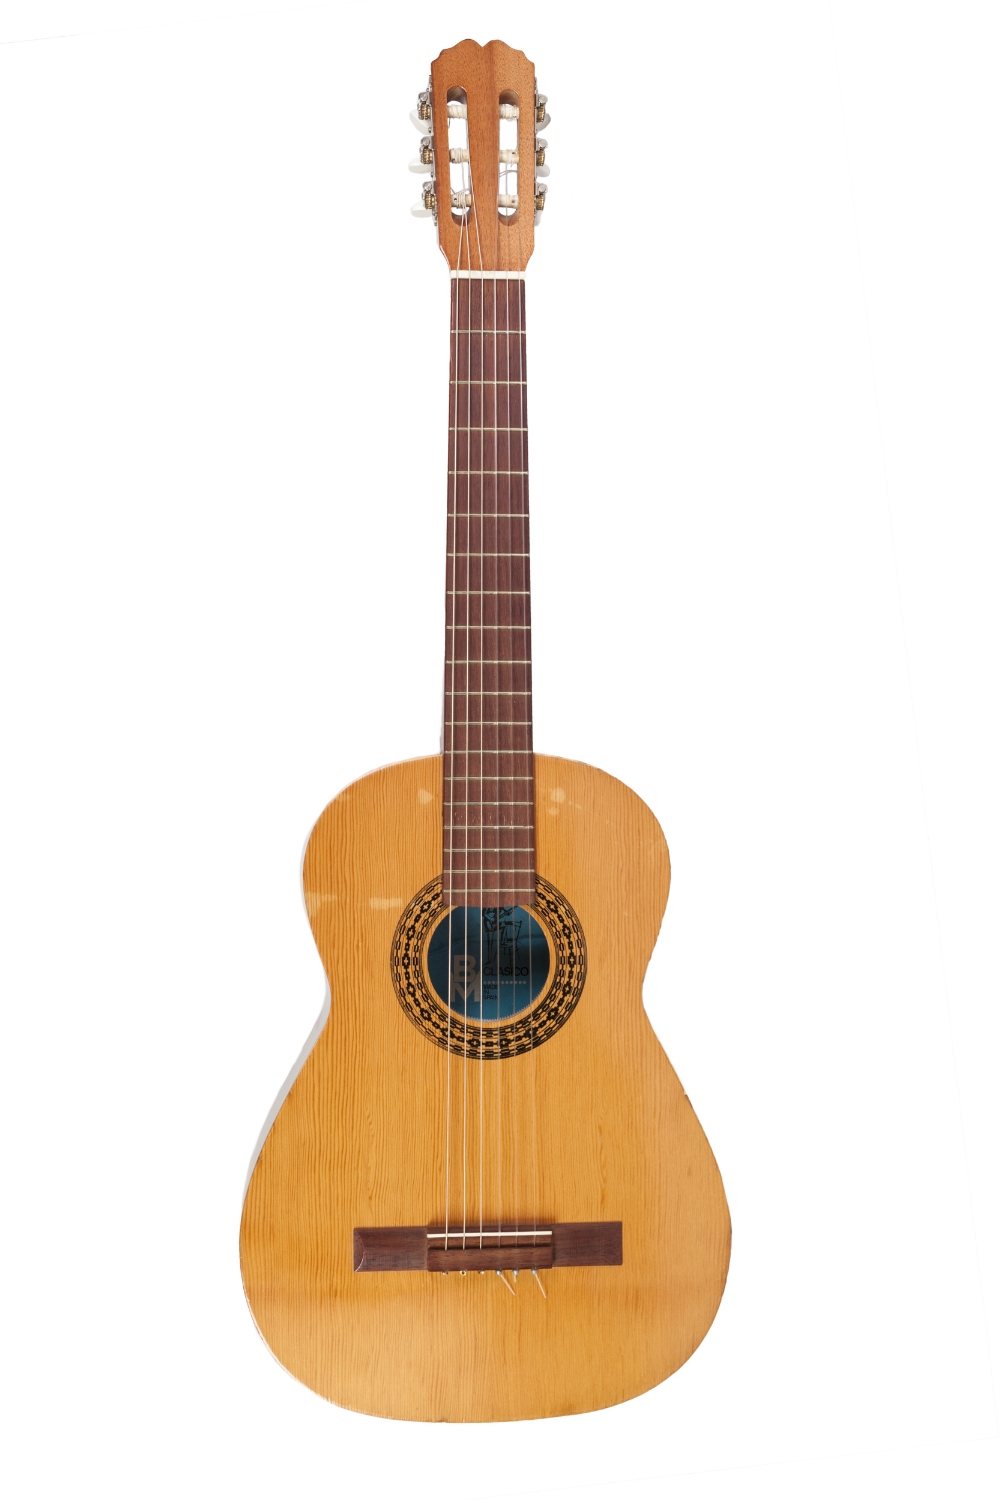 B.M. 'CLASSICO' SIX STRING ACOUSTIC GUITAR, labelled 'Made in Spain' and ANOTHER SPANISH ACOUSTIC